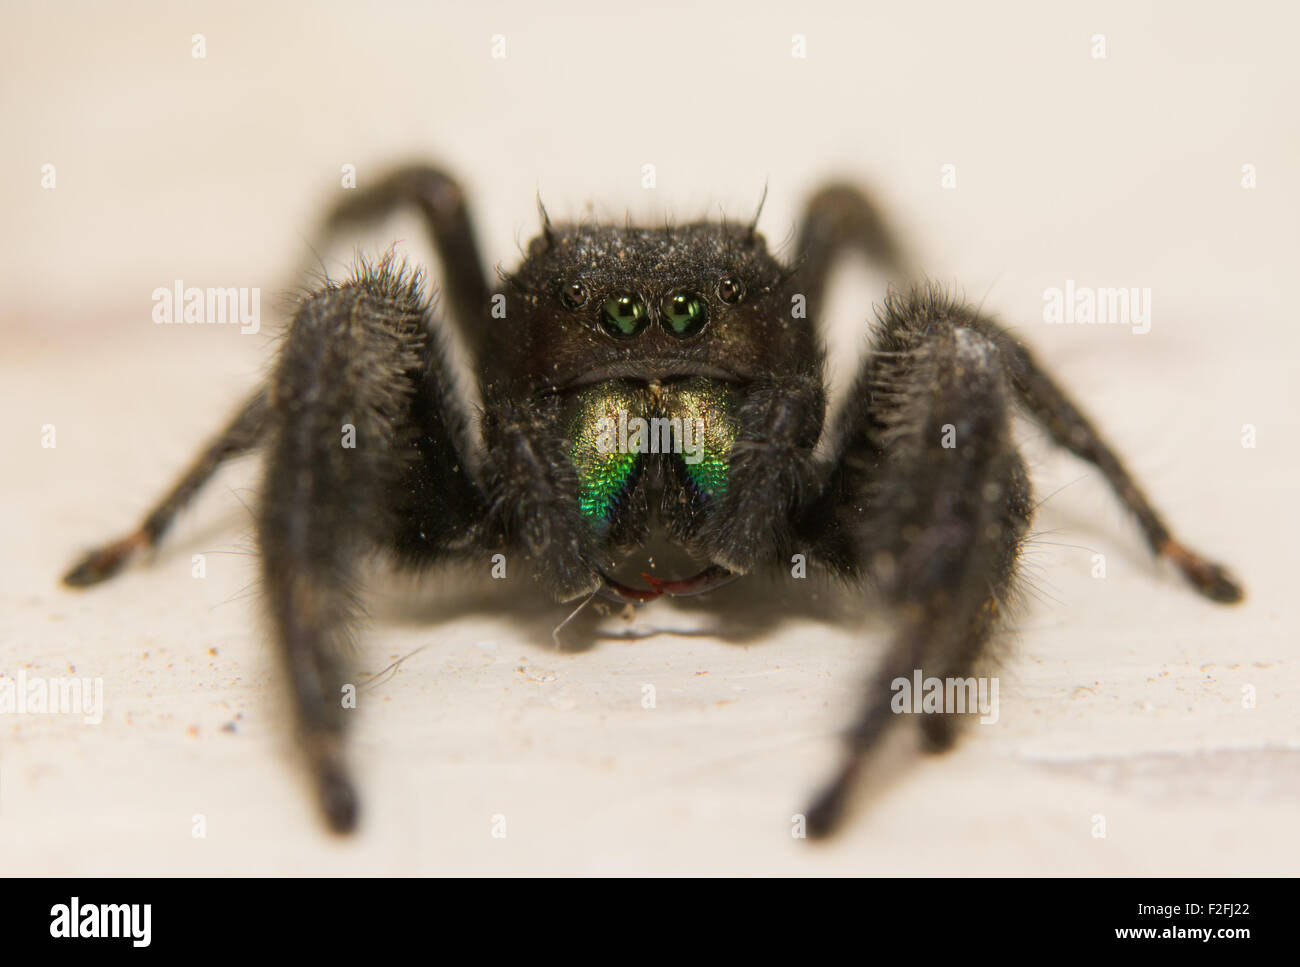 Adorably cute male Red-backed jumping spider, Phidippus johnsoni, looking like an alien with his multiple eyes Stock Photo